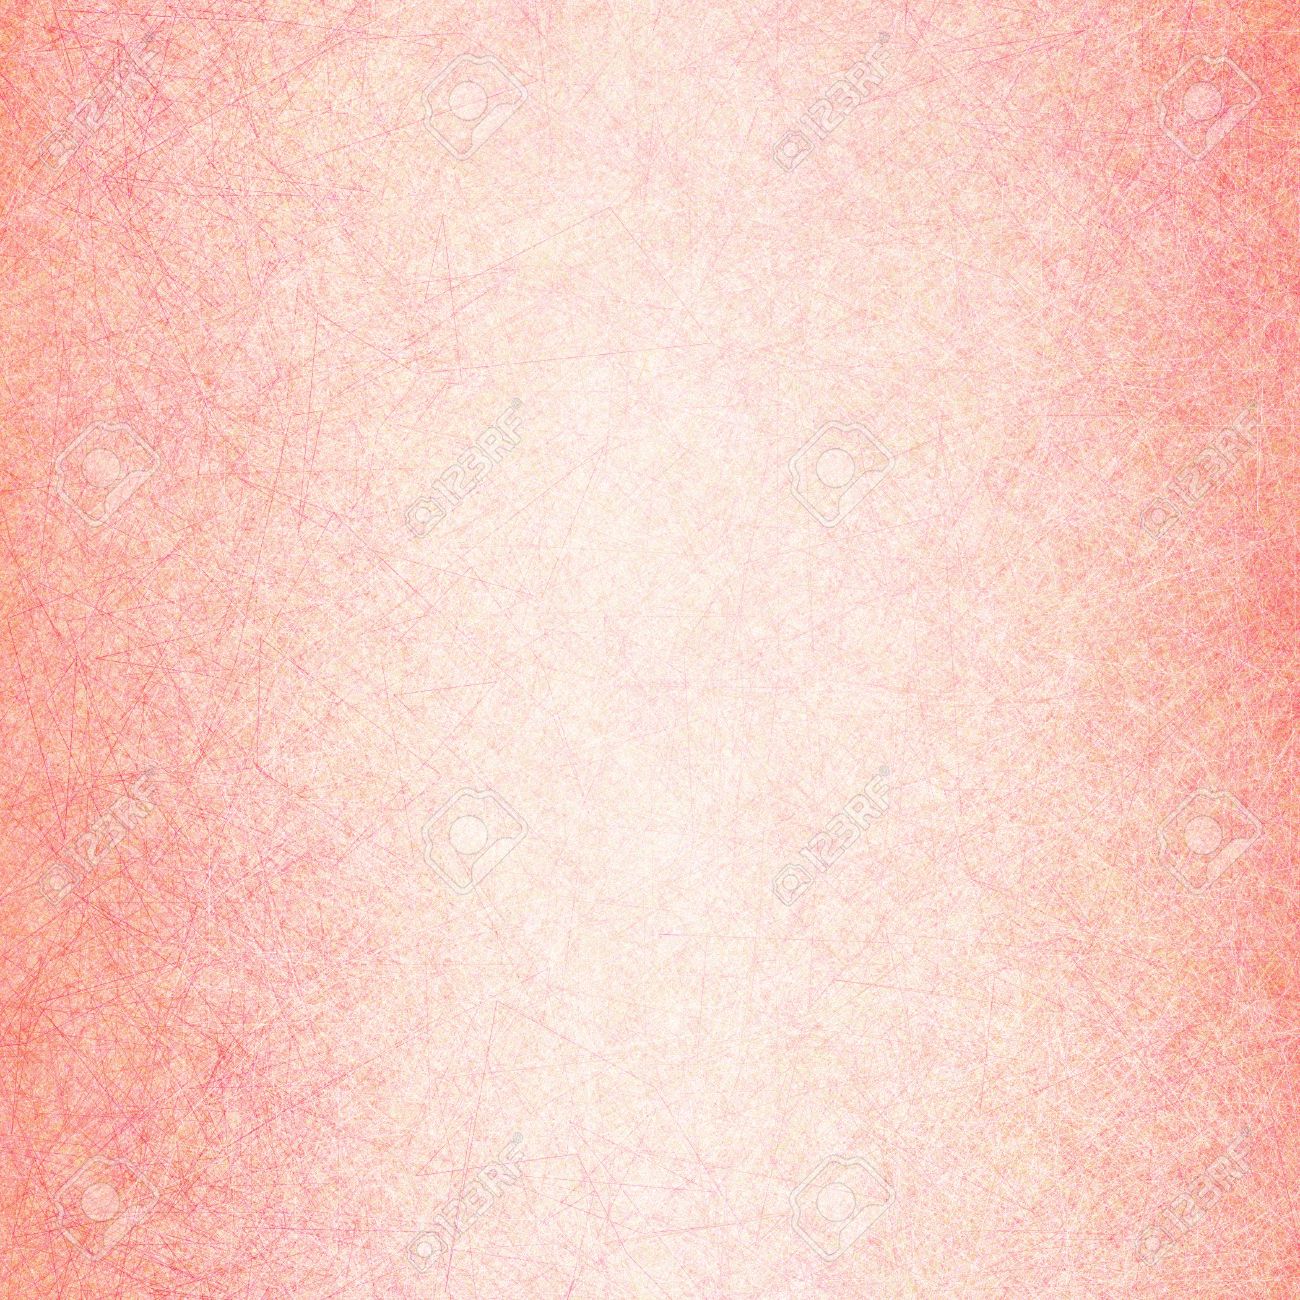 Pink Peach Background With Textured Linen Or Canvas Line Brush 1300x1300